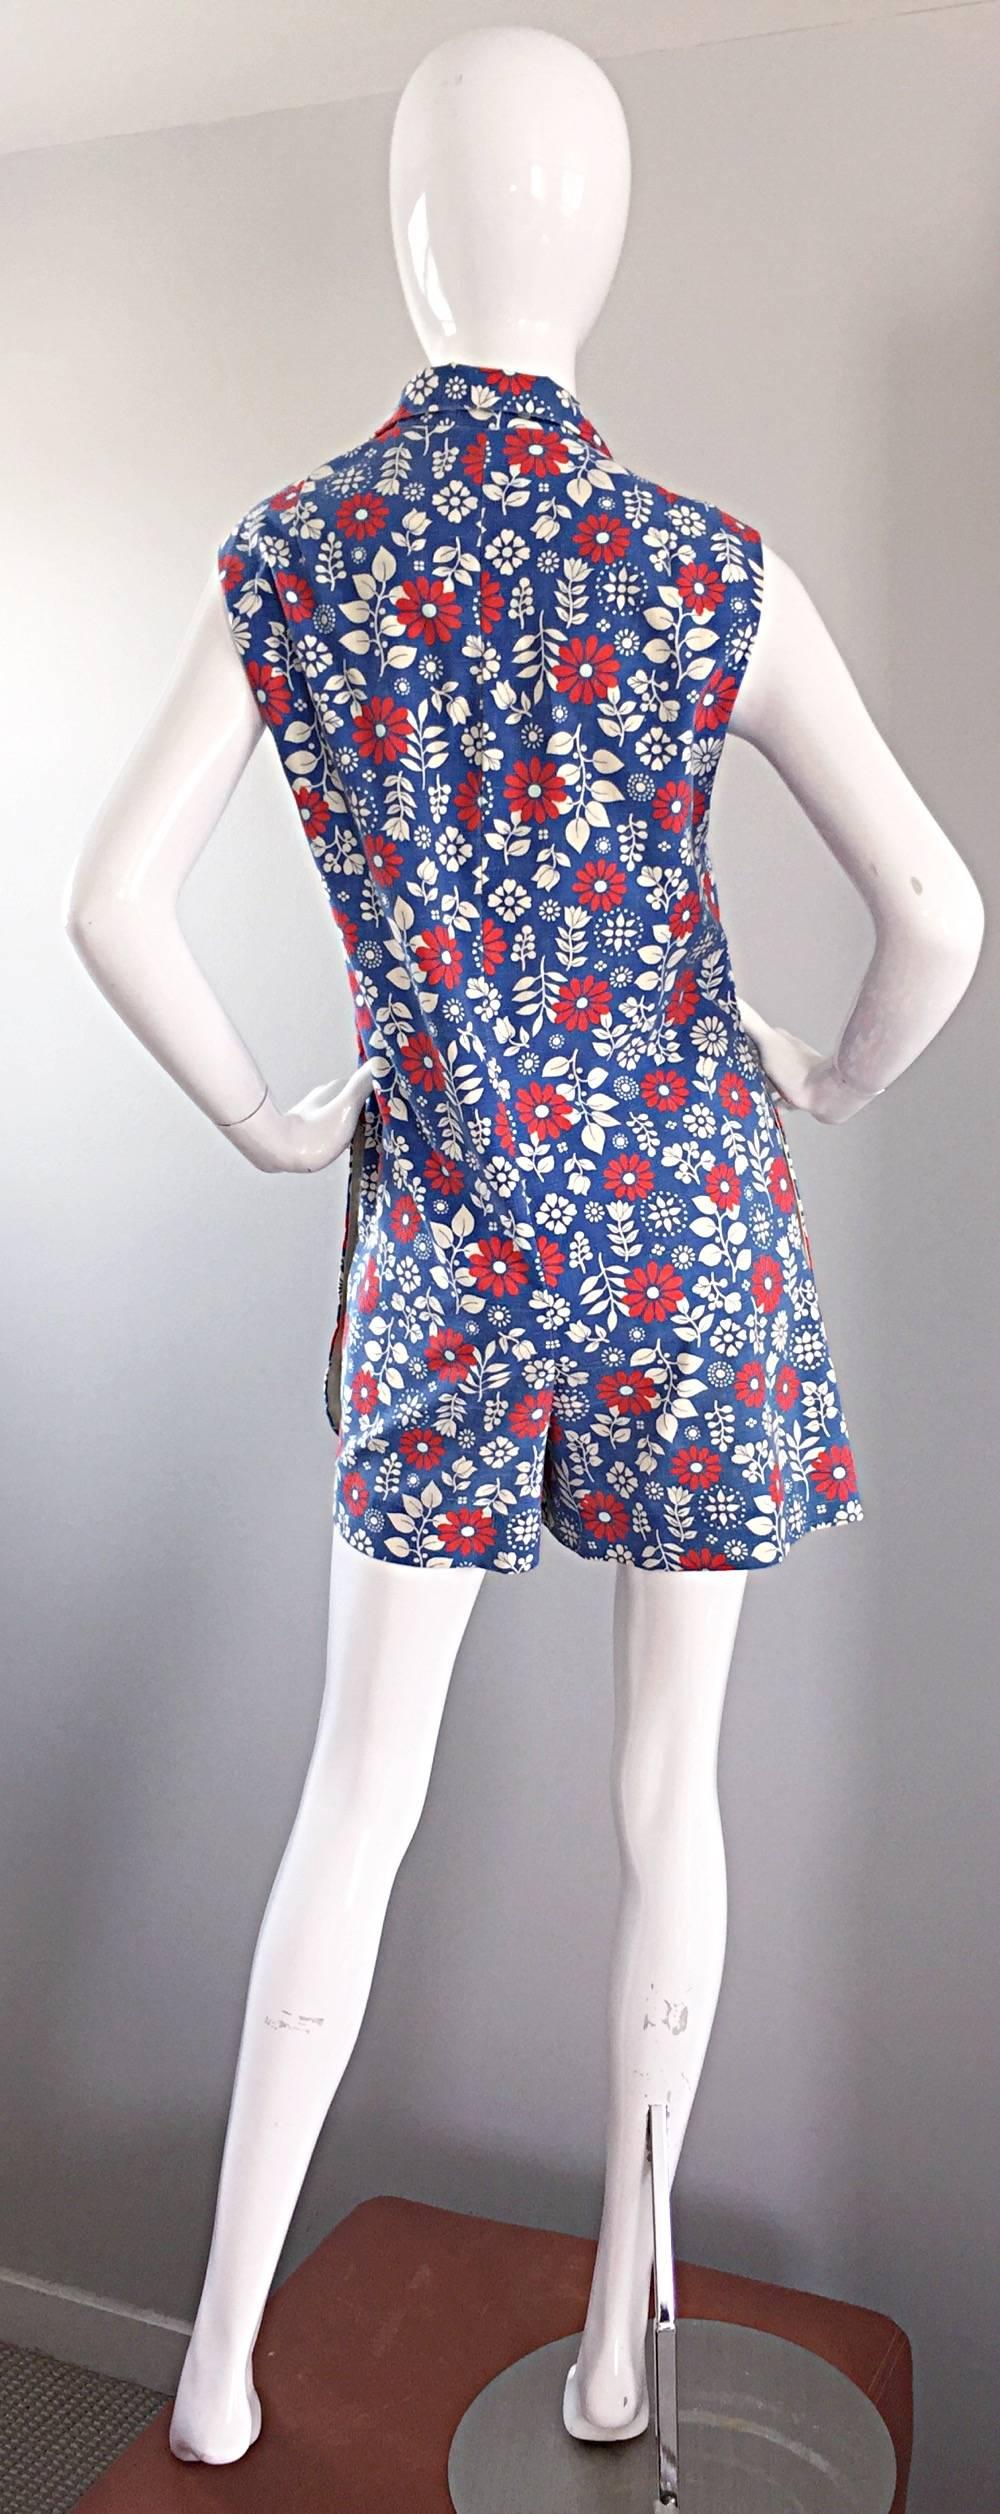 Rare 1960s Abercrombie & Fitch Romper Jumpsuit with Skort Red White & Blue In Excellent Condition For Sale In San Diego, CA